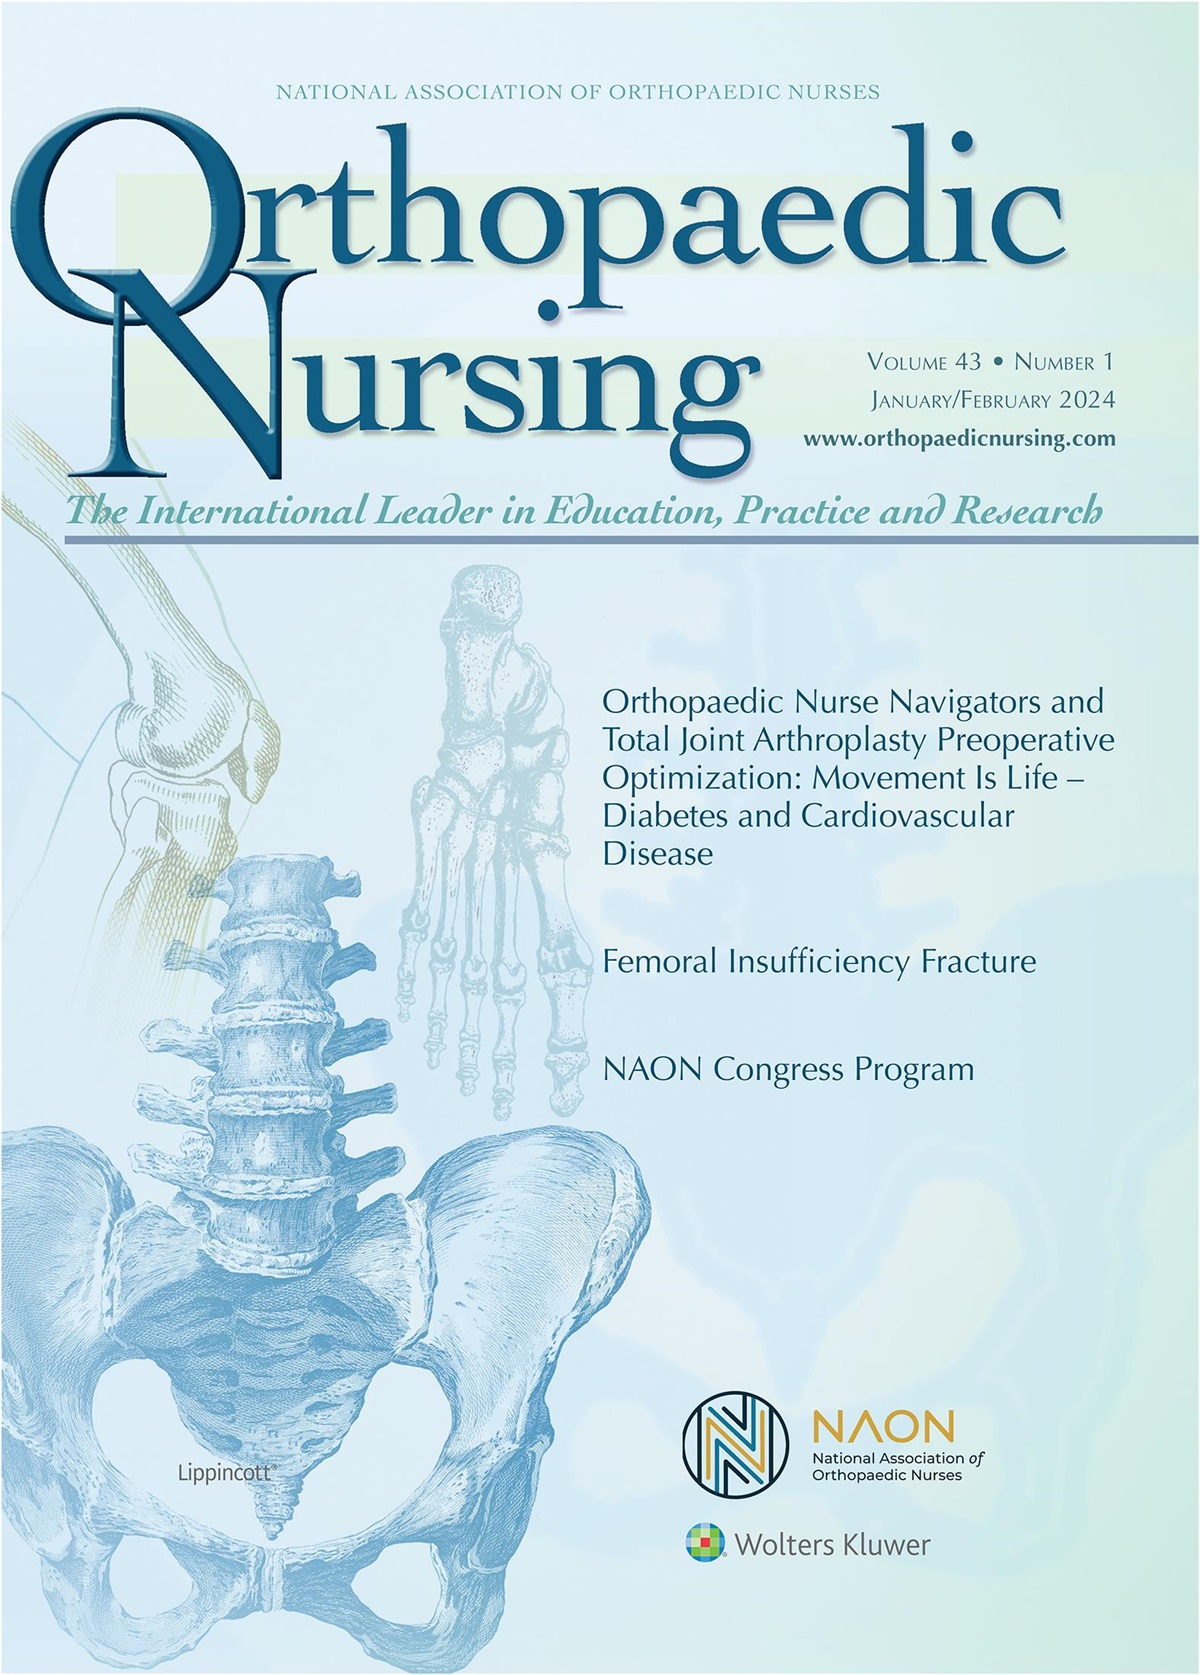 NCPD Tests: Orthopaedic Nurse Navigators and Total Joint Arthroplasty Preoperative Optimization: Diabetes and Cardiovascular Disease—Part 3 of the Movement Is Life Special: ONJ: Series